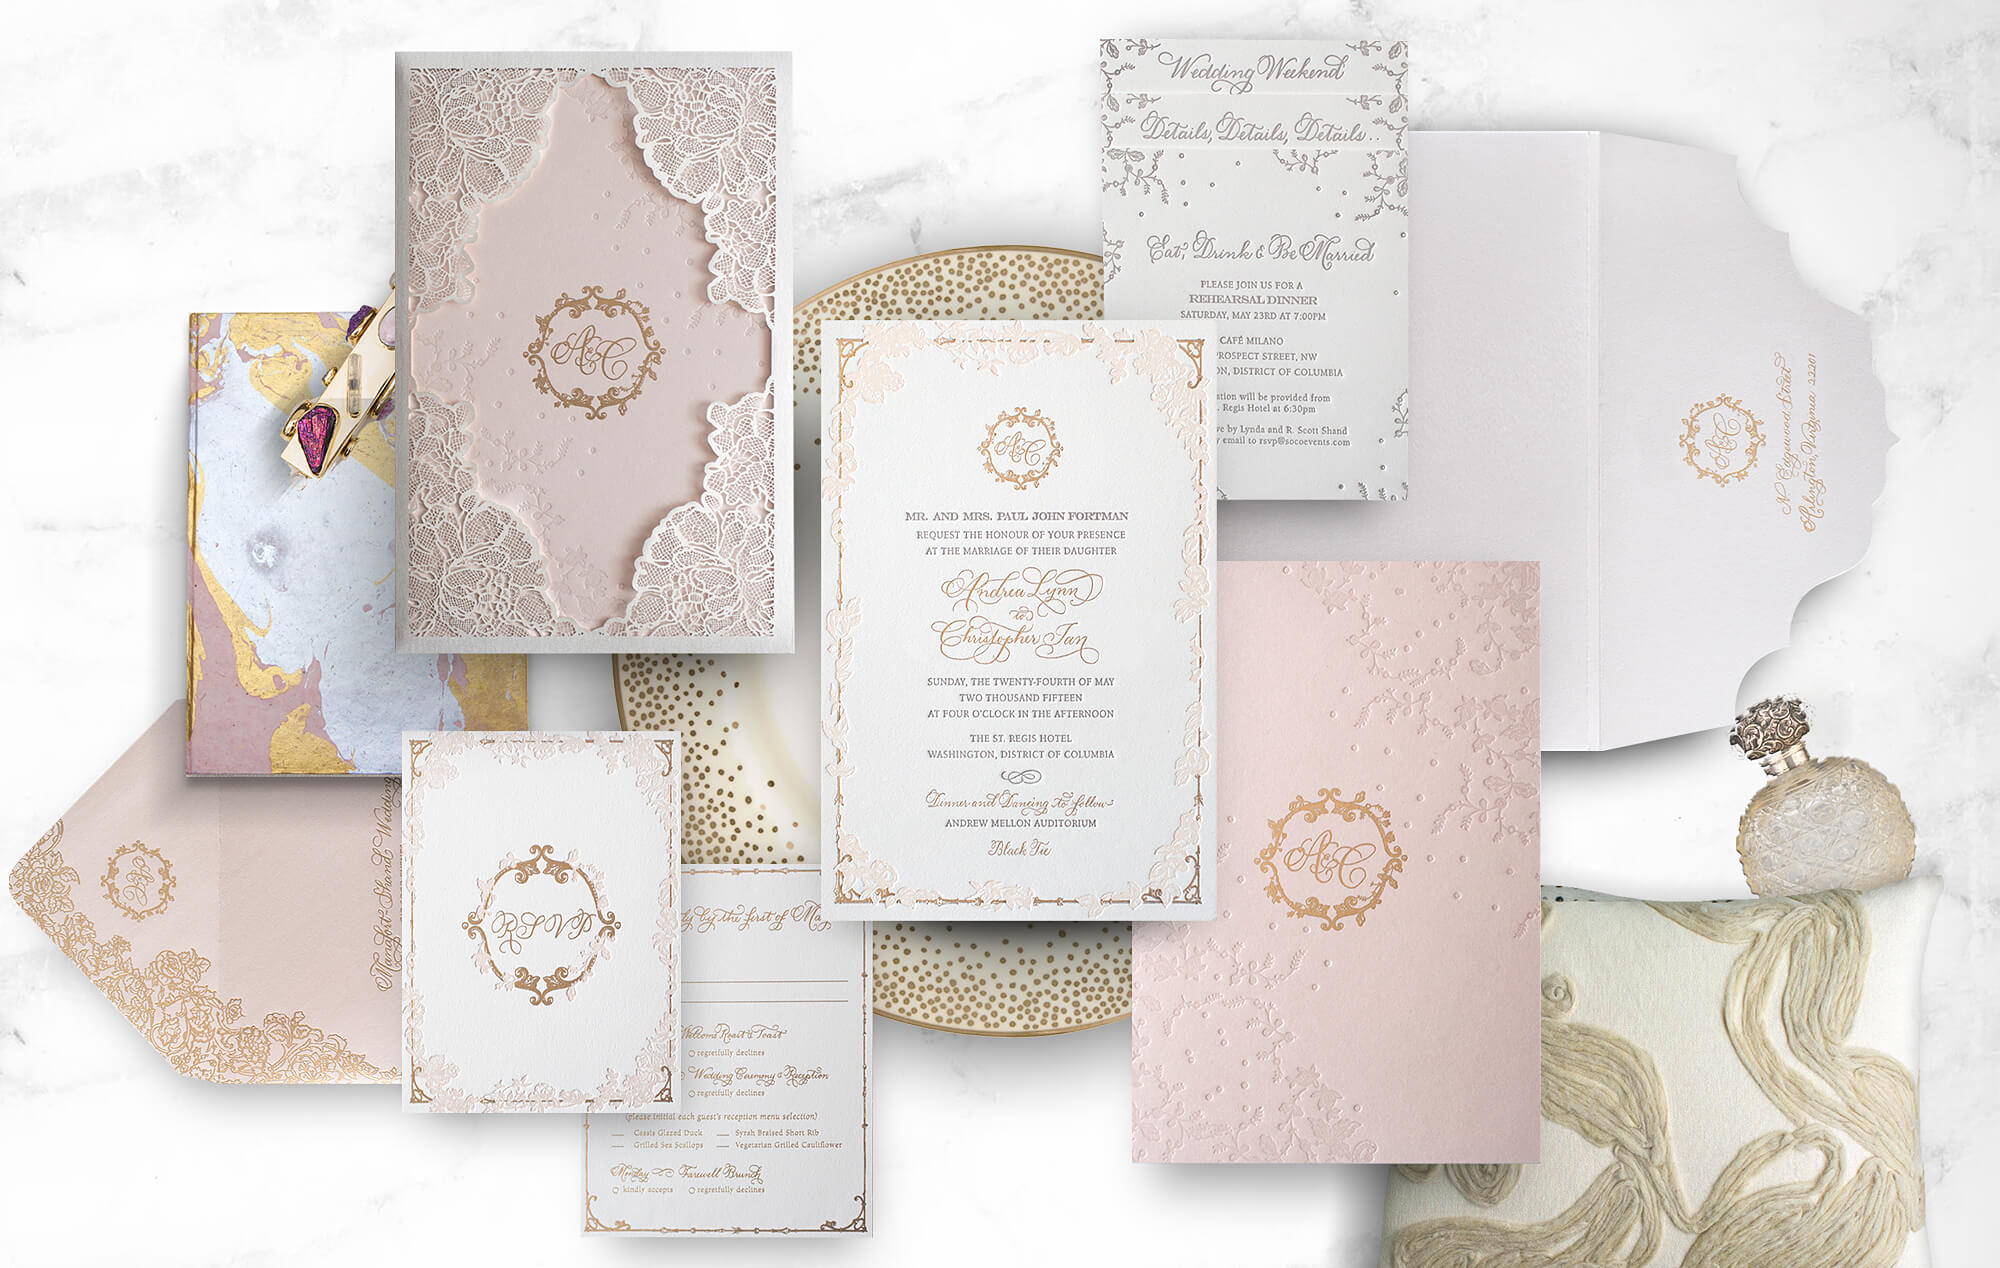 Laser cut lace wedding invitation in blush, champagne and gold